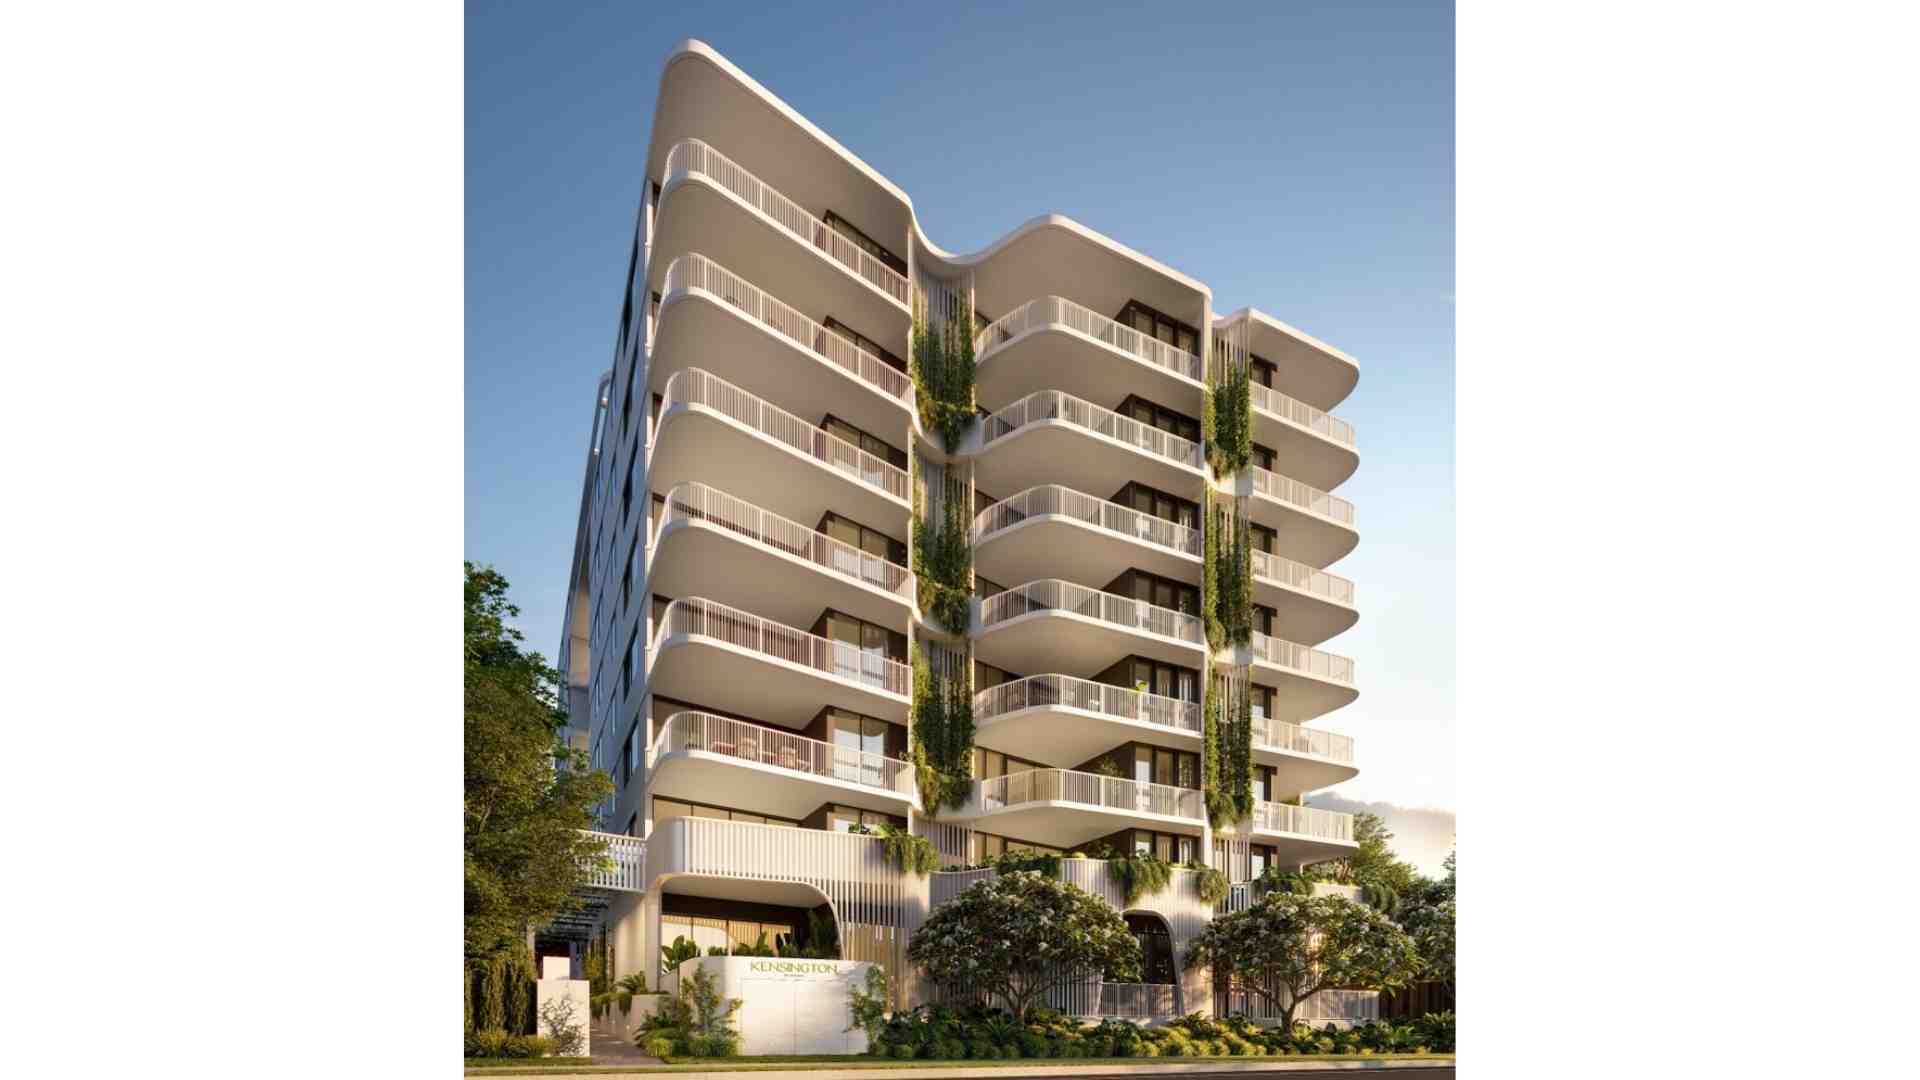 Kensington QLD residential apartment, white building with plant on the side